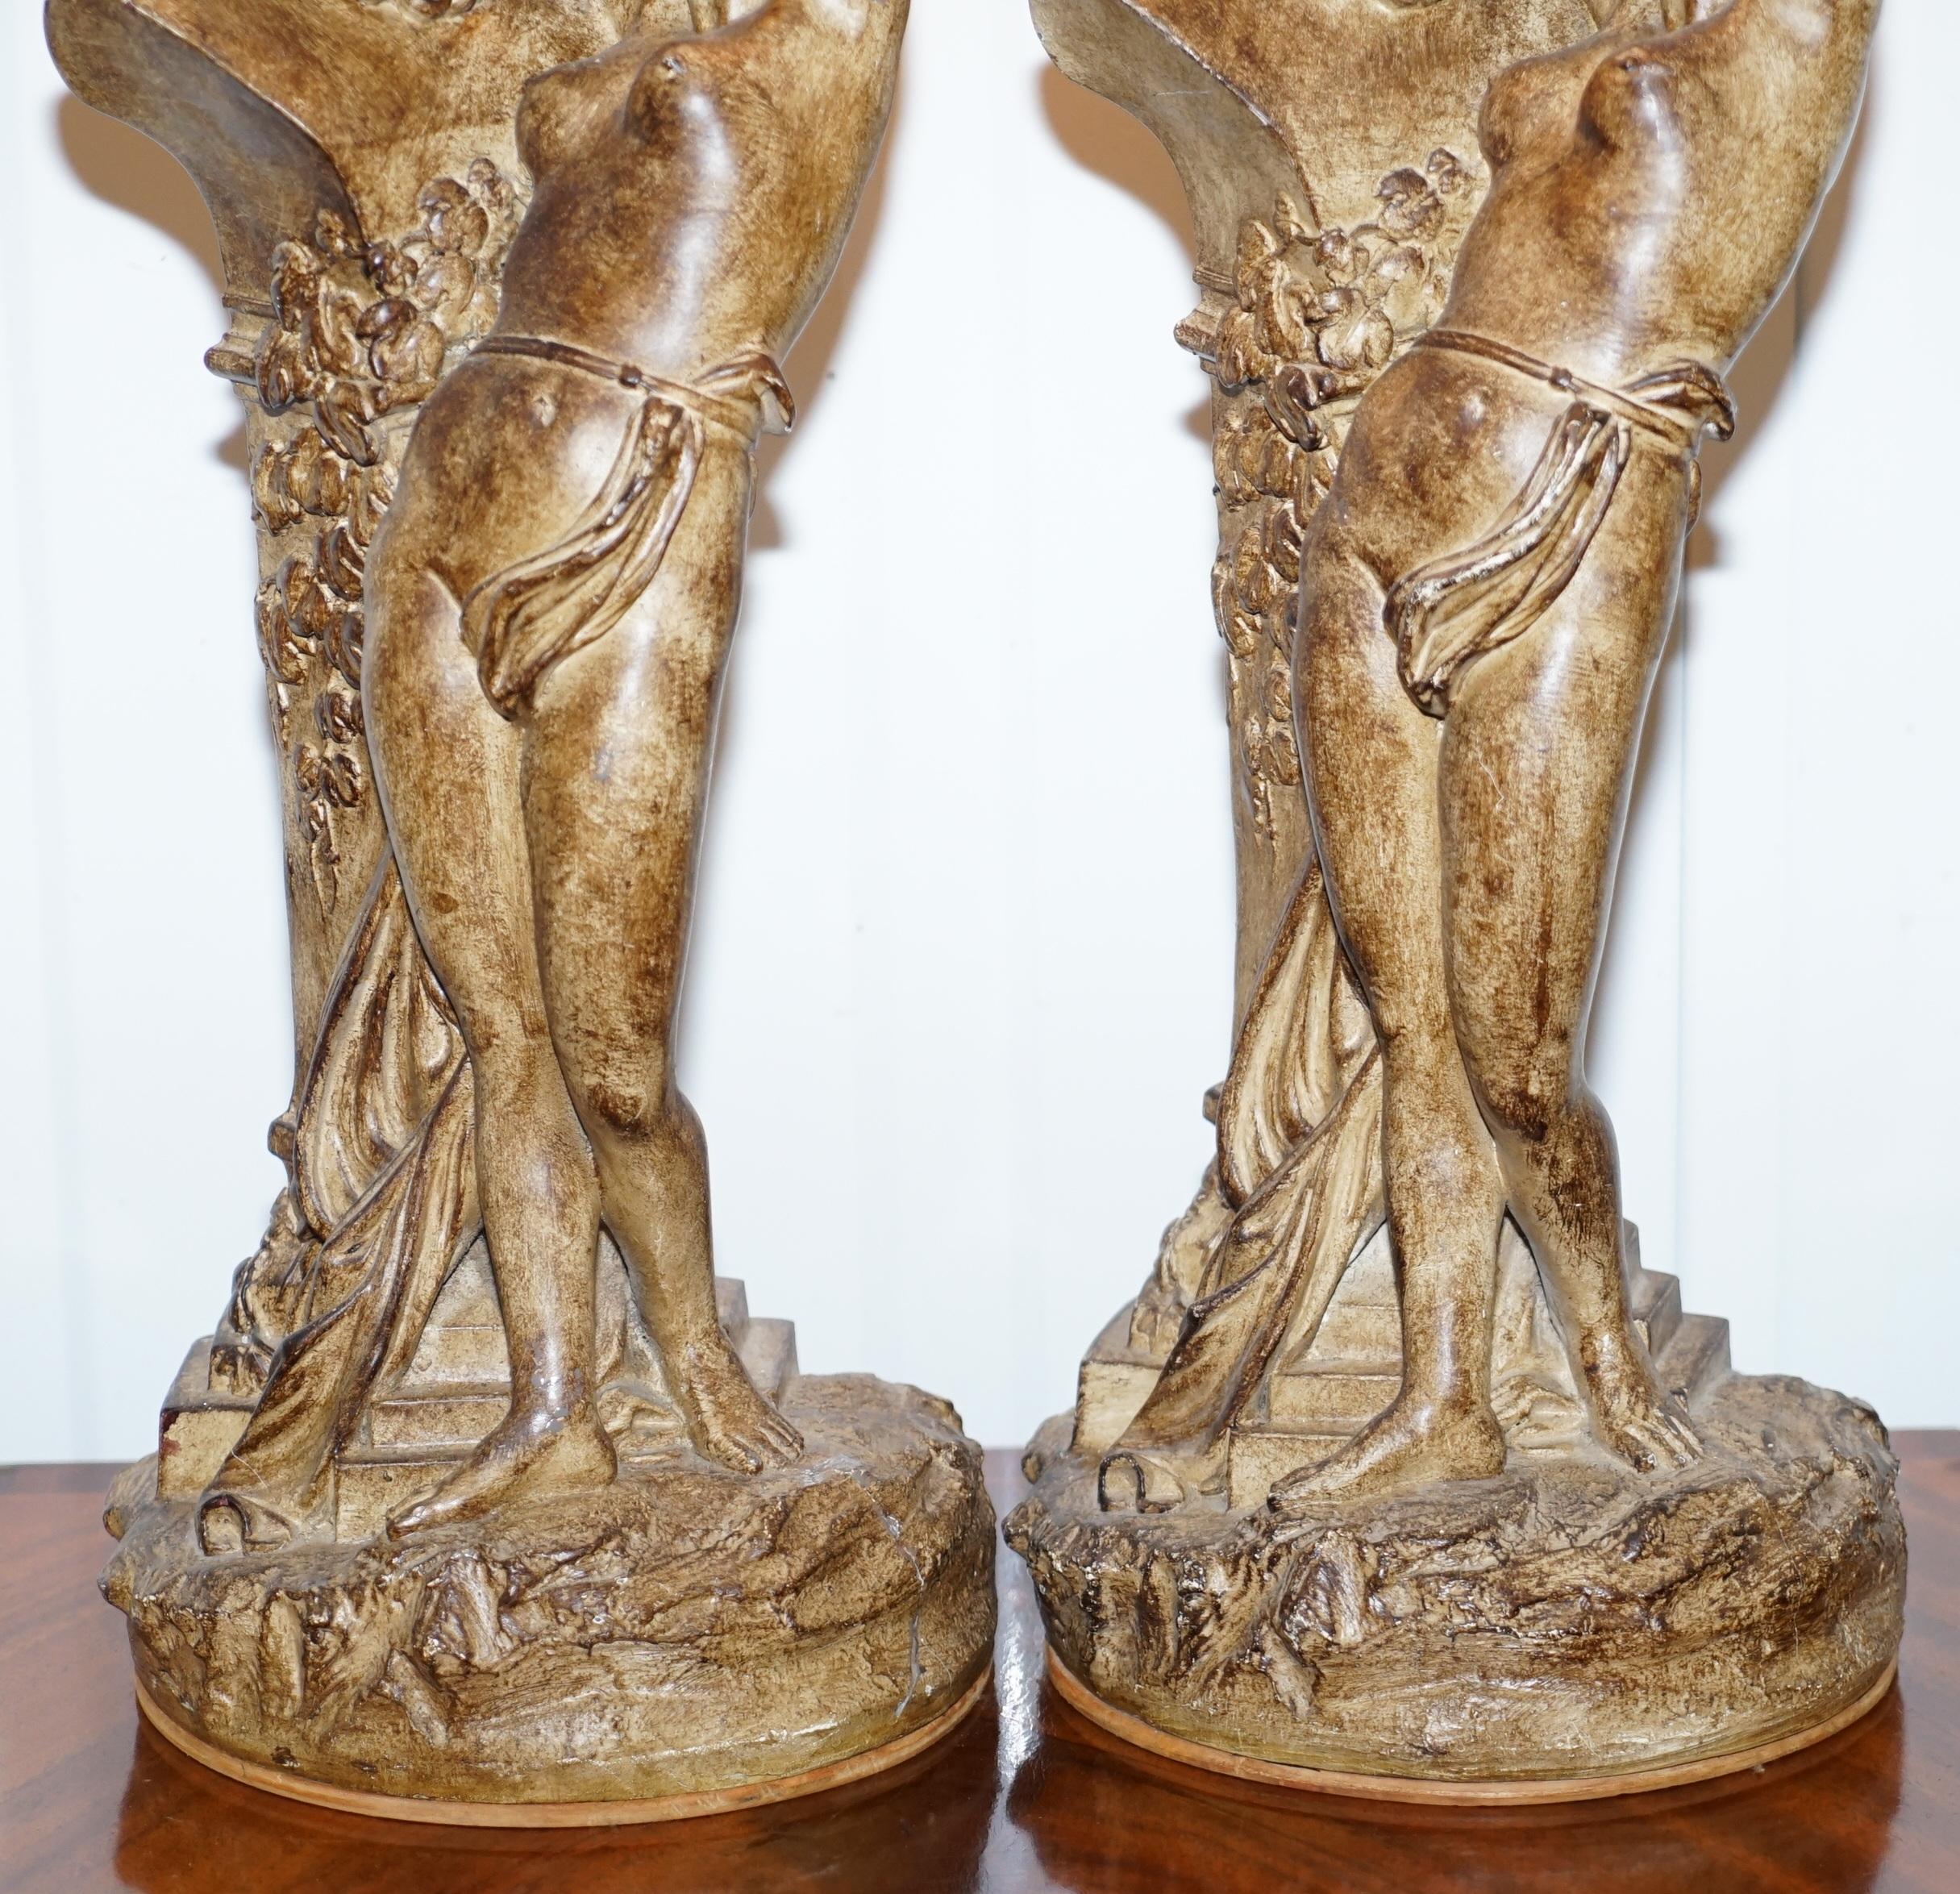 Modern Pair of Vintage Style Maiden Seducing Zeus Statue Table Lamps Nicely Decorative